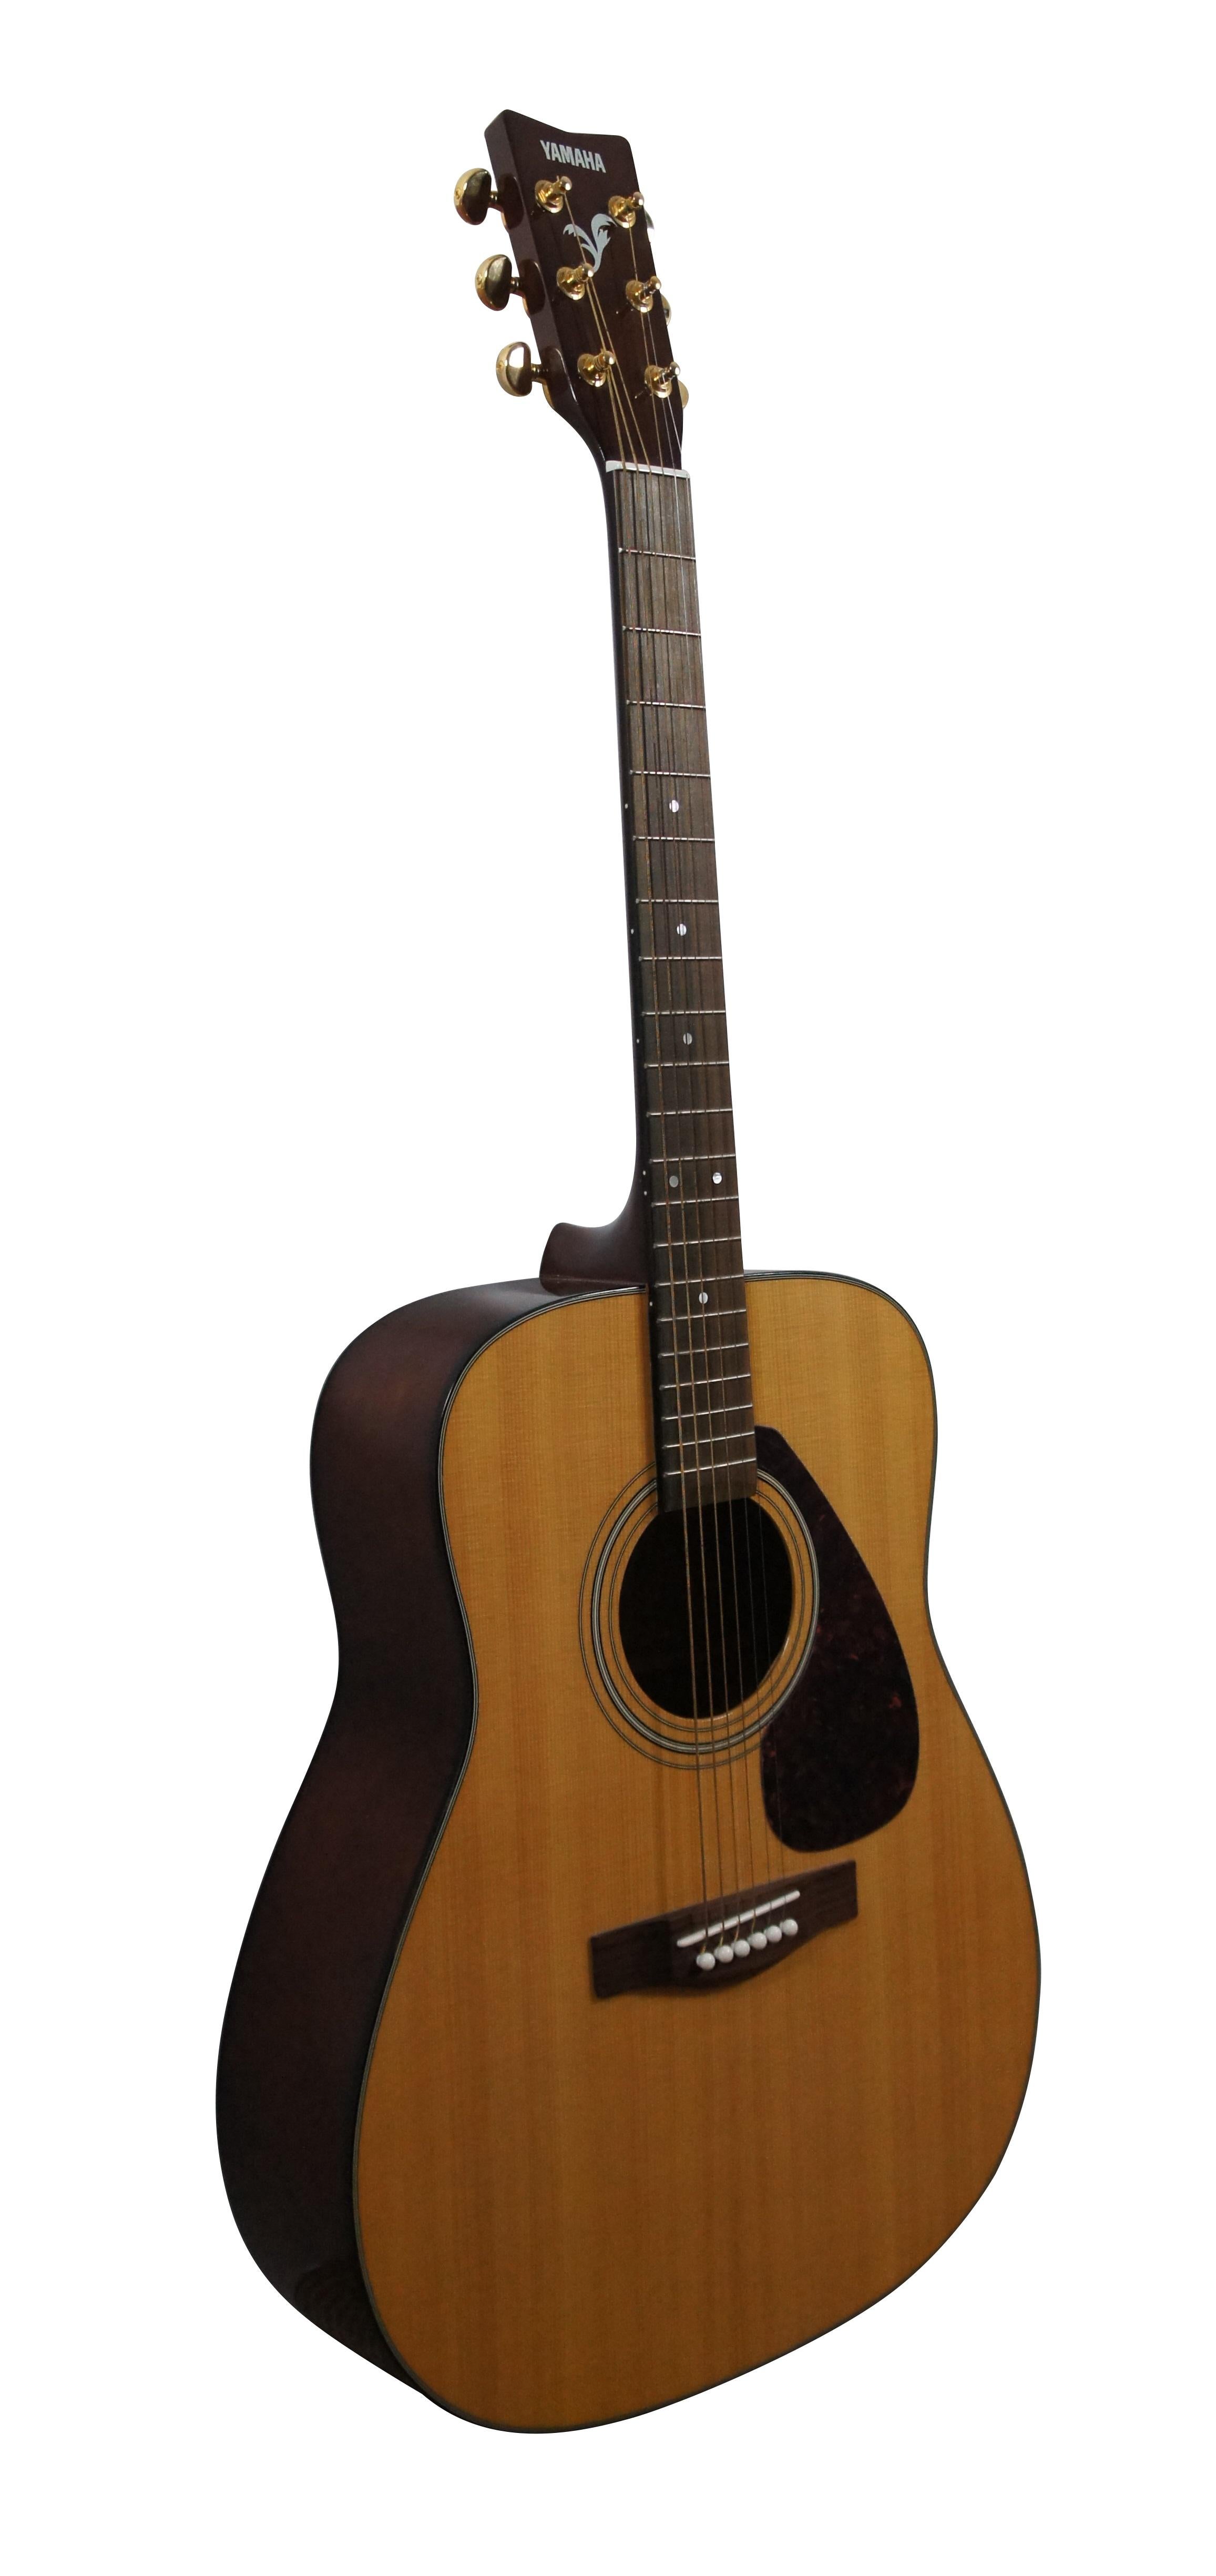 Yamaha F-335 acoustic guitar – QLM284228. Includes black soft shell case, one unopened package of Martin Acoustic SP Guitar Strings - Phosphor Bronze Medium, Korg GA-30 Guitar/Bass Tuner (battery operated) with instruction booklet, and 8 Fender